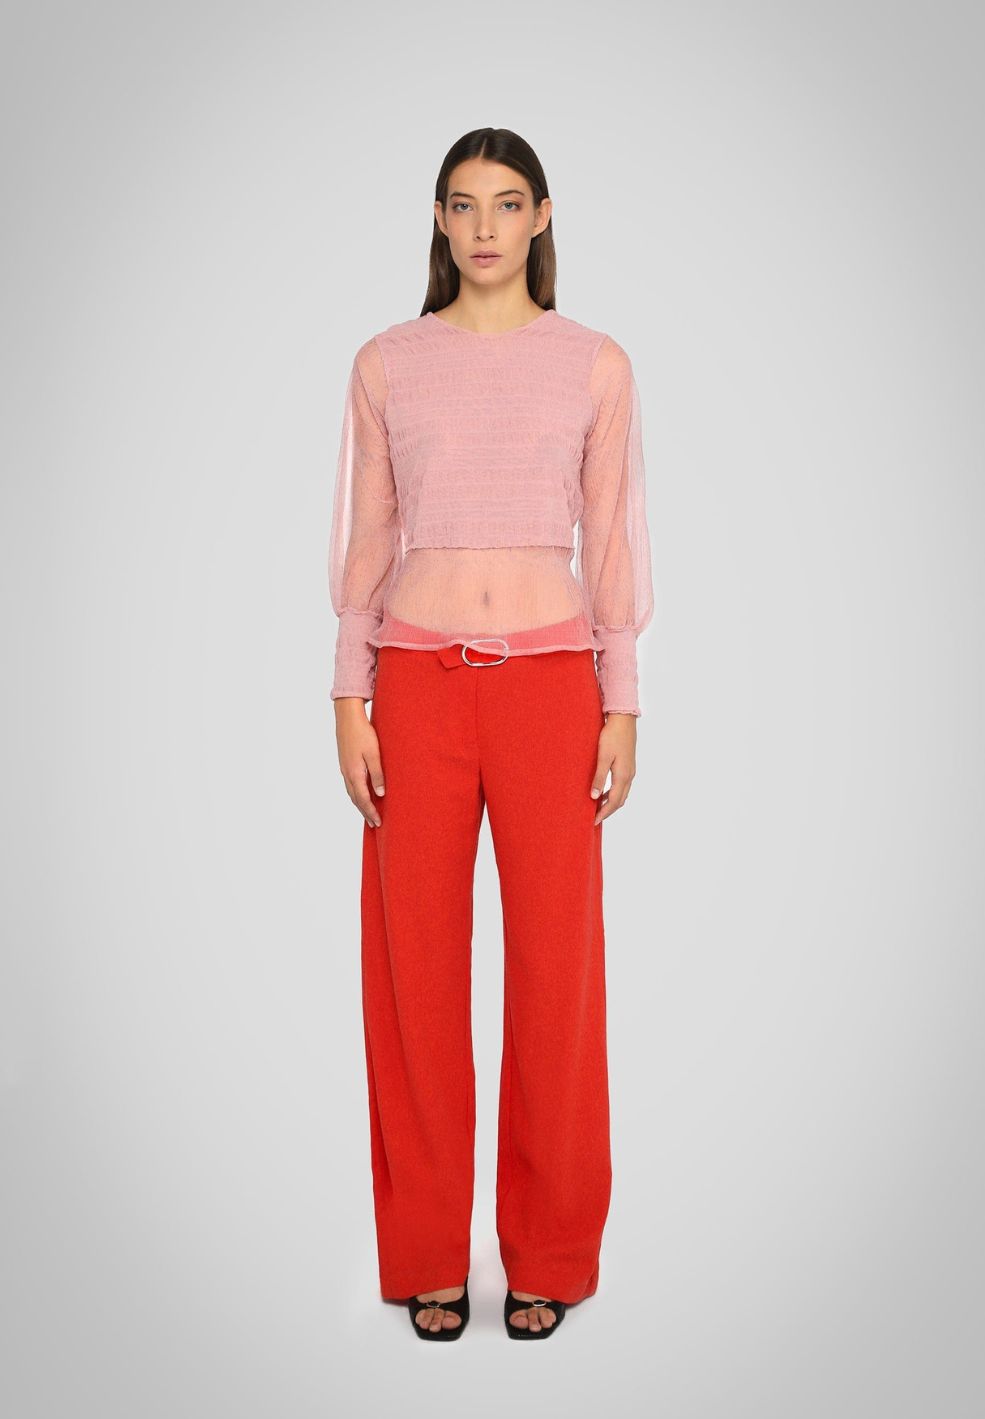 Beso Red Linen Pants